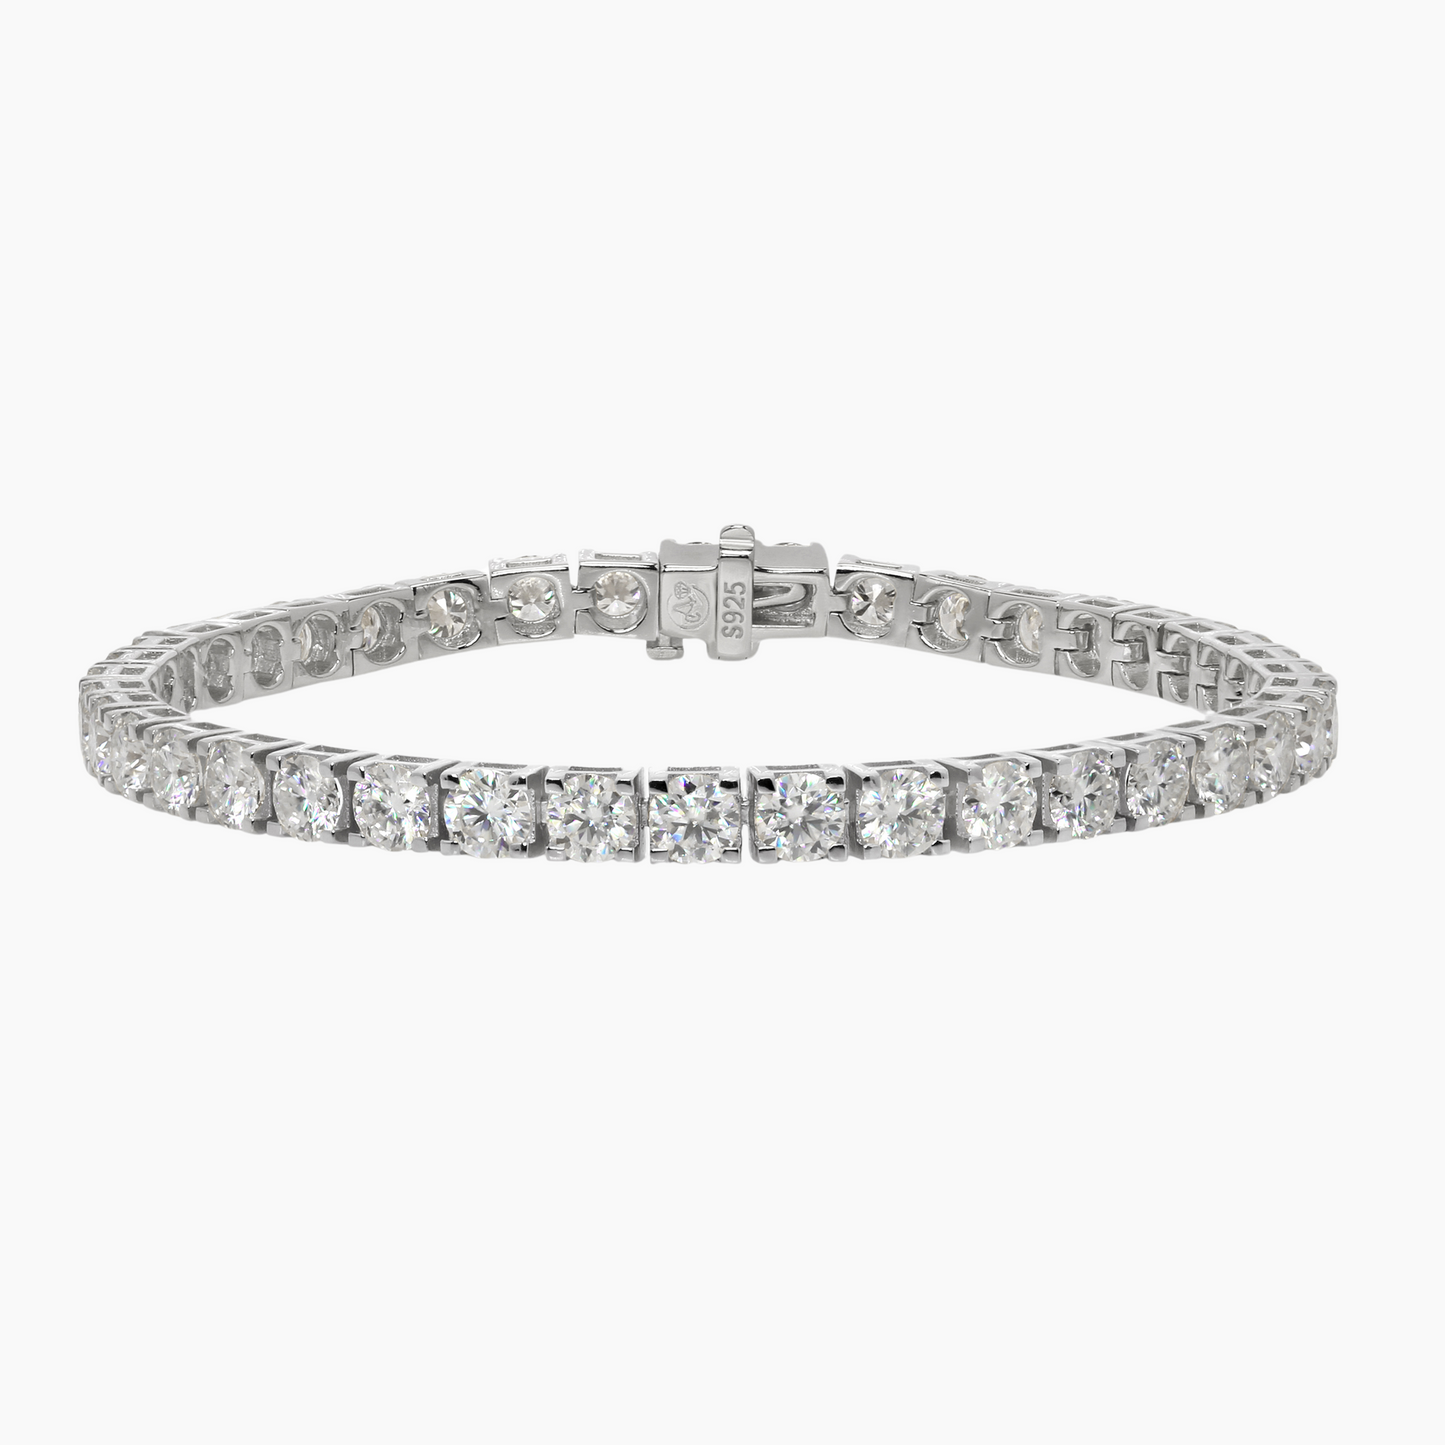 Lab Grown Moissanite Classic Tennis Bracelet | 4.0mm | Round Cut | Square Setting | 7.0 Inches